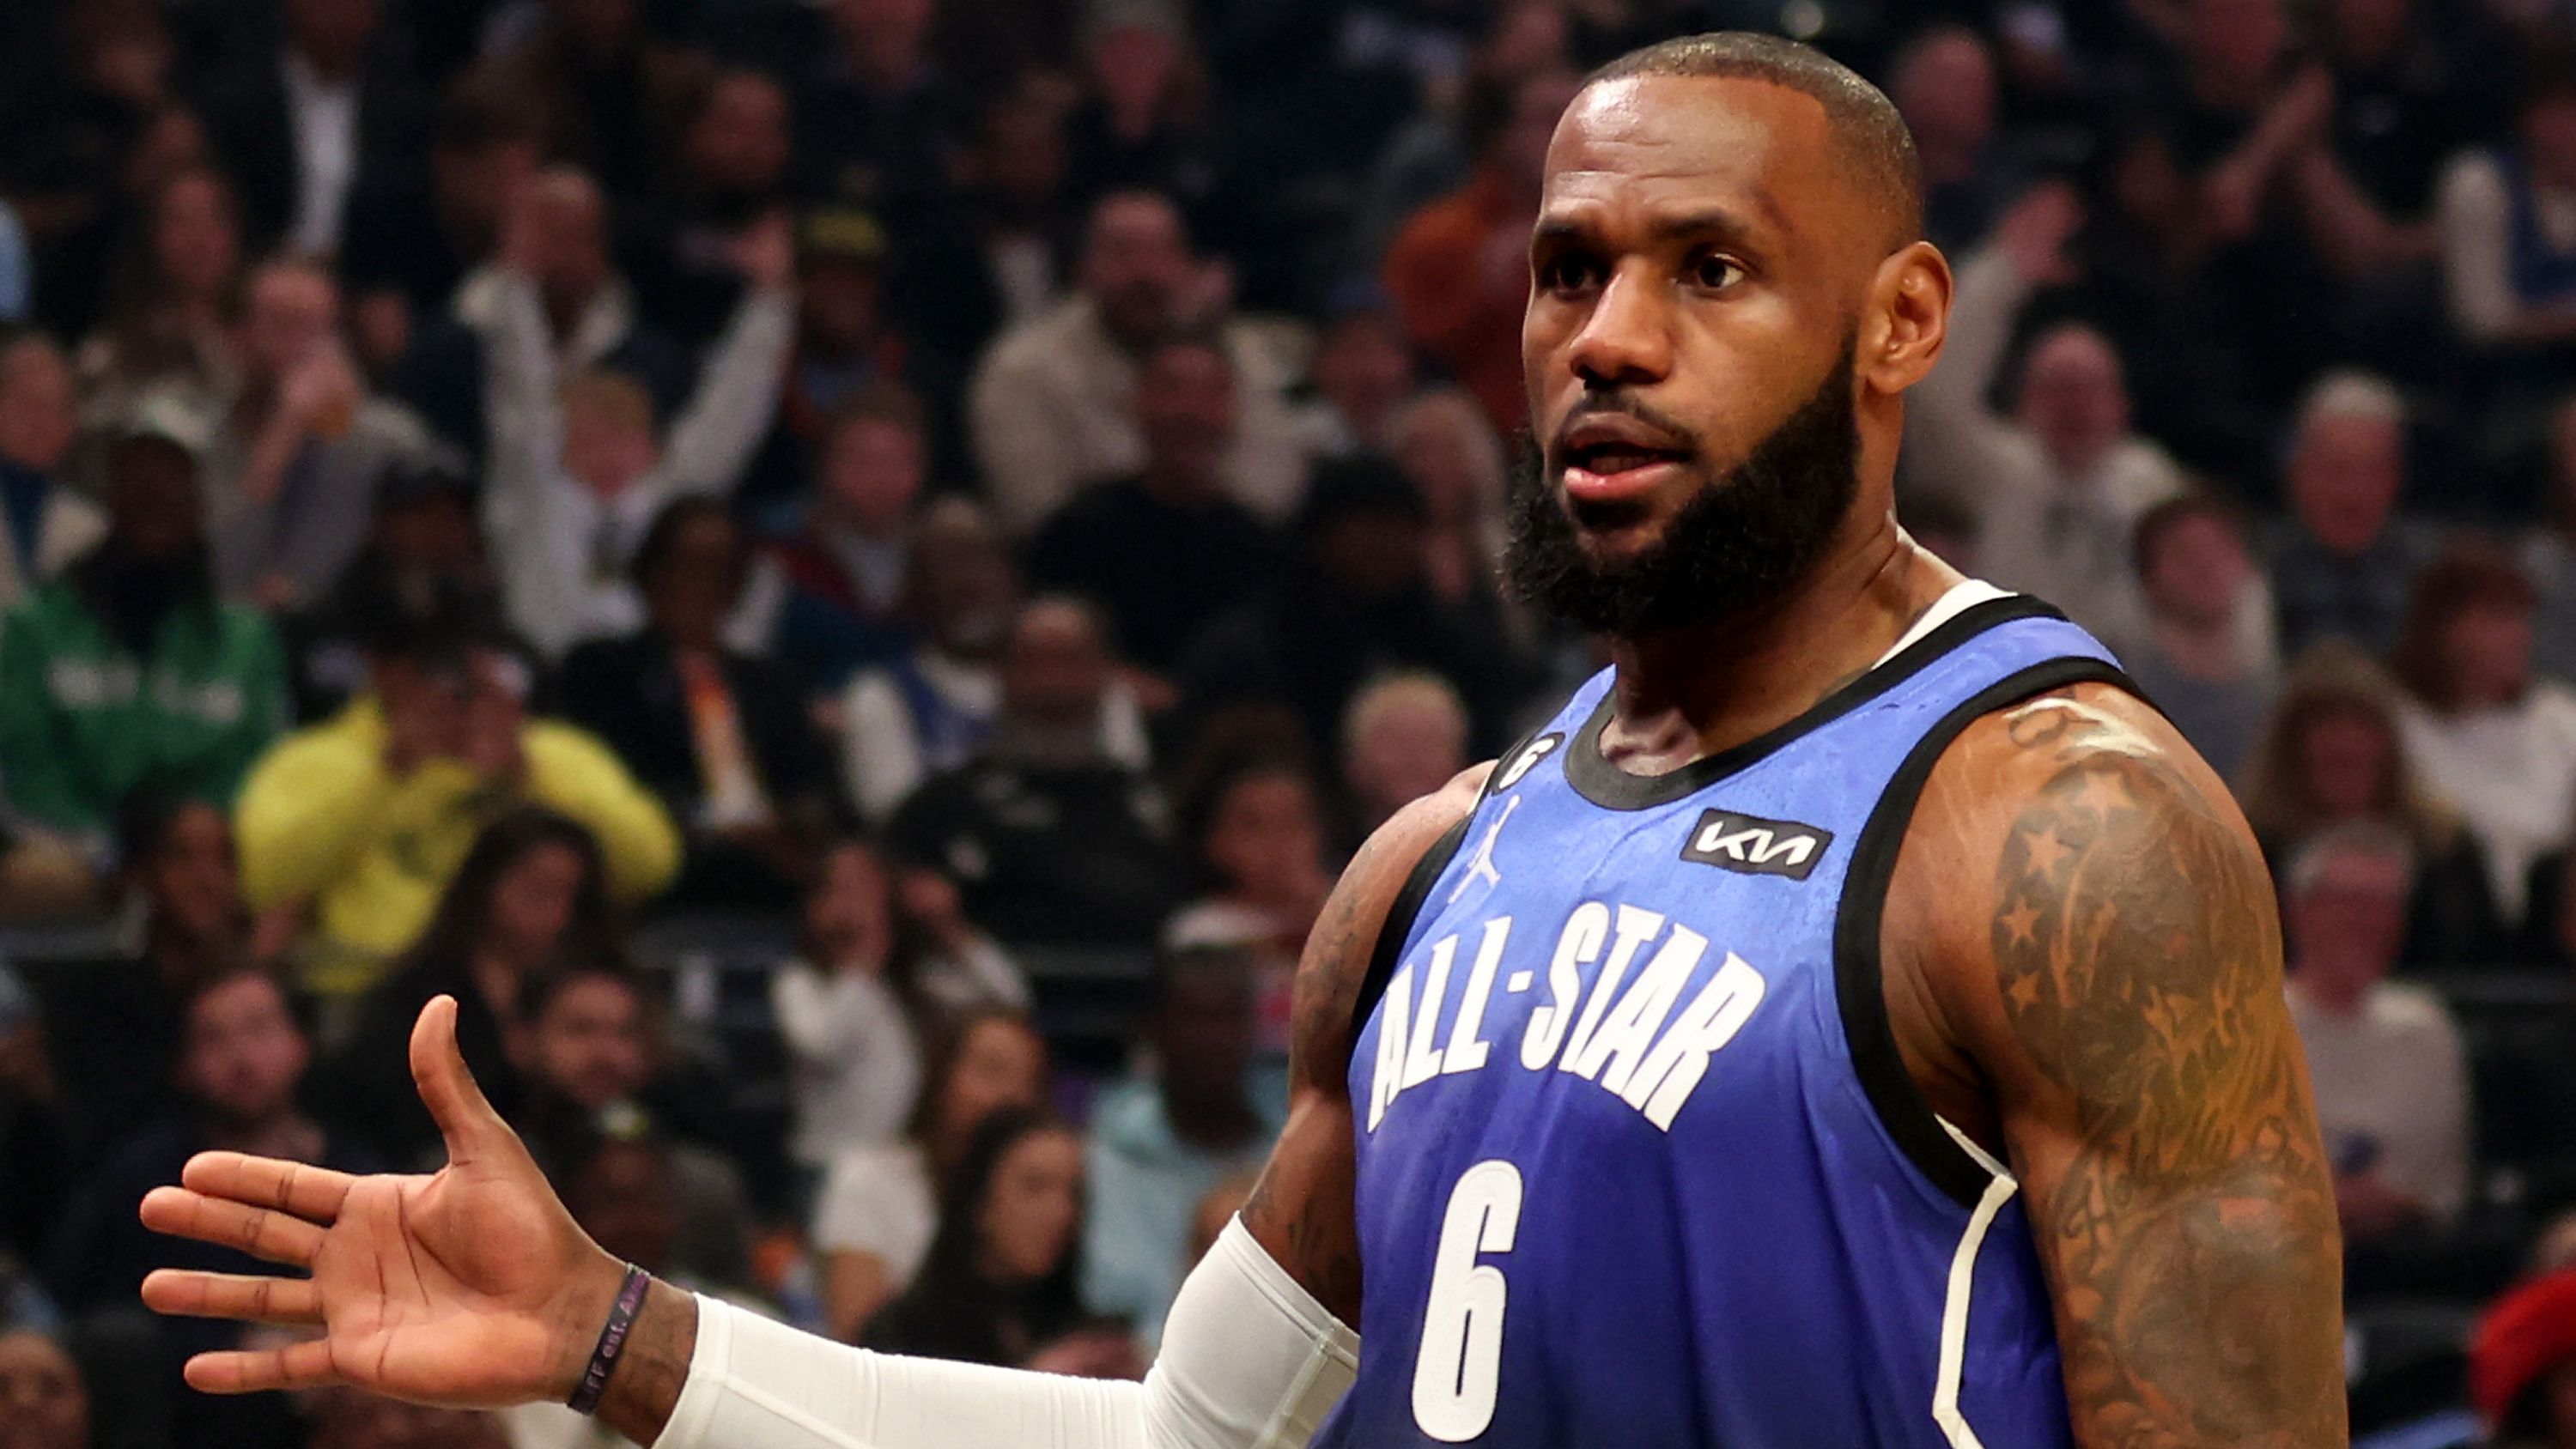 'That's not basketball': Calls for NBA All-Star game to be retooled after disappointment